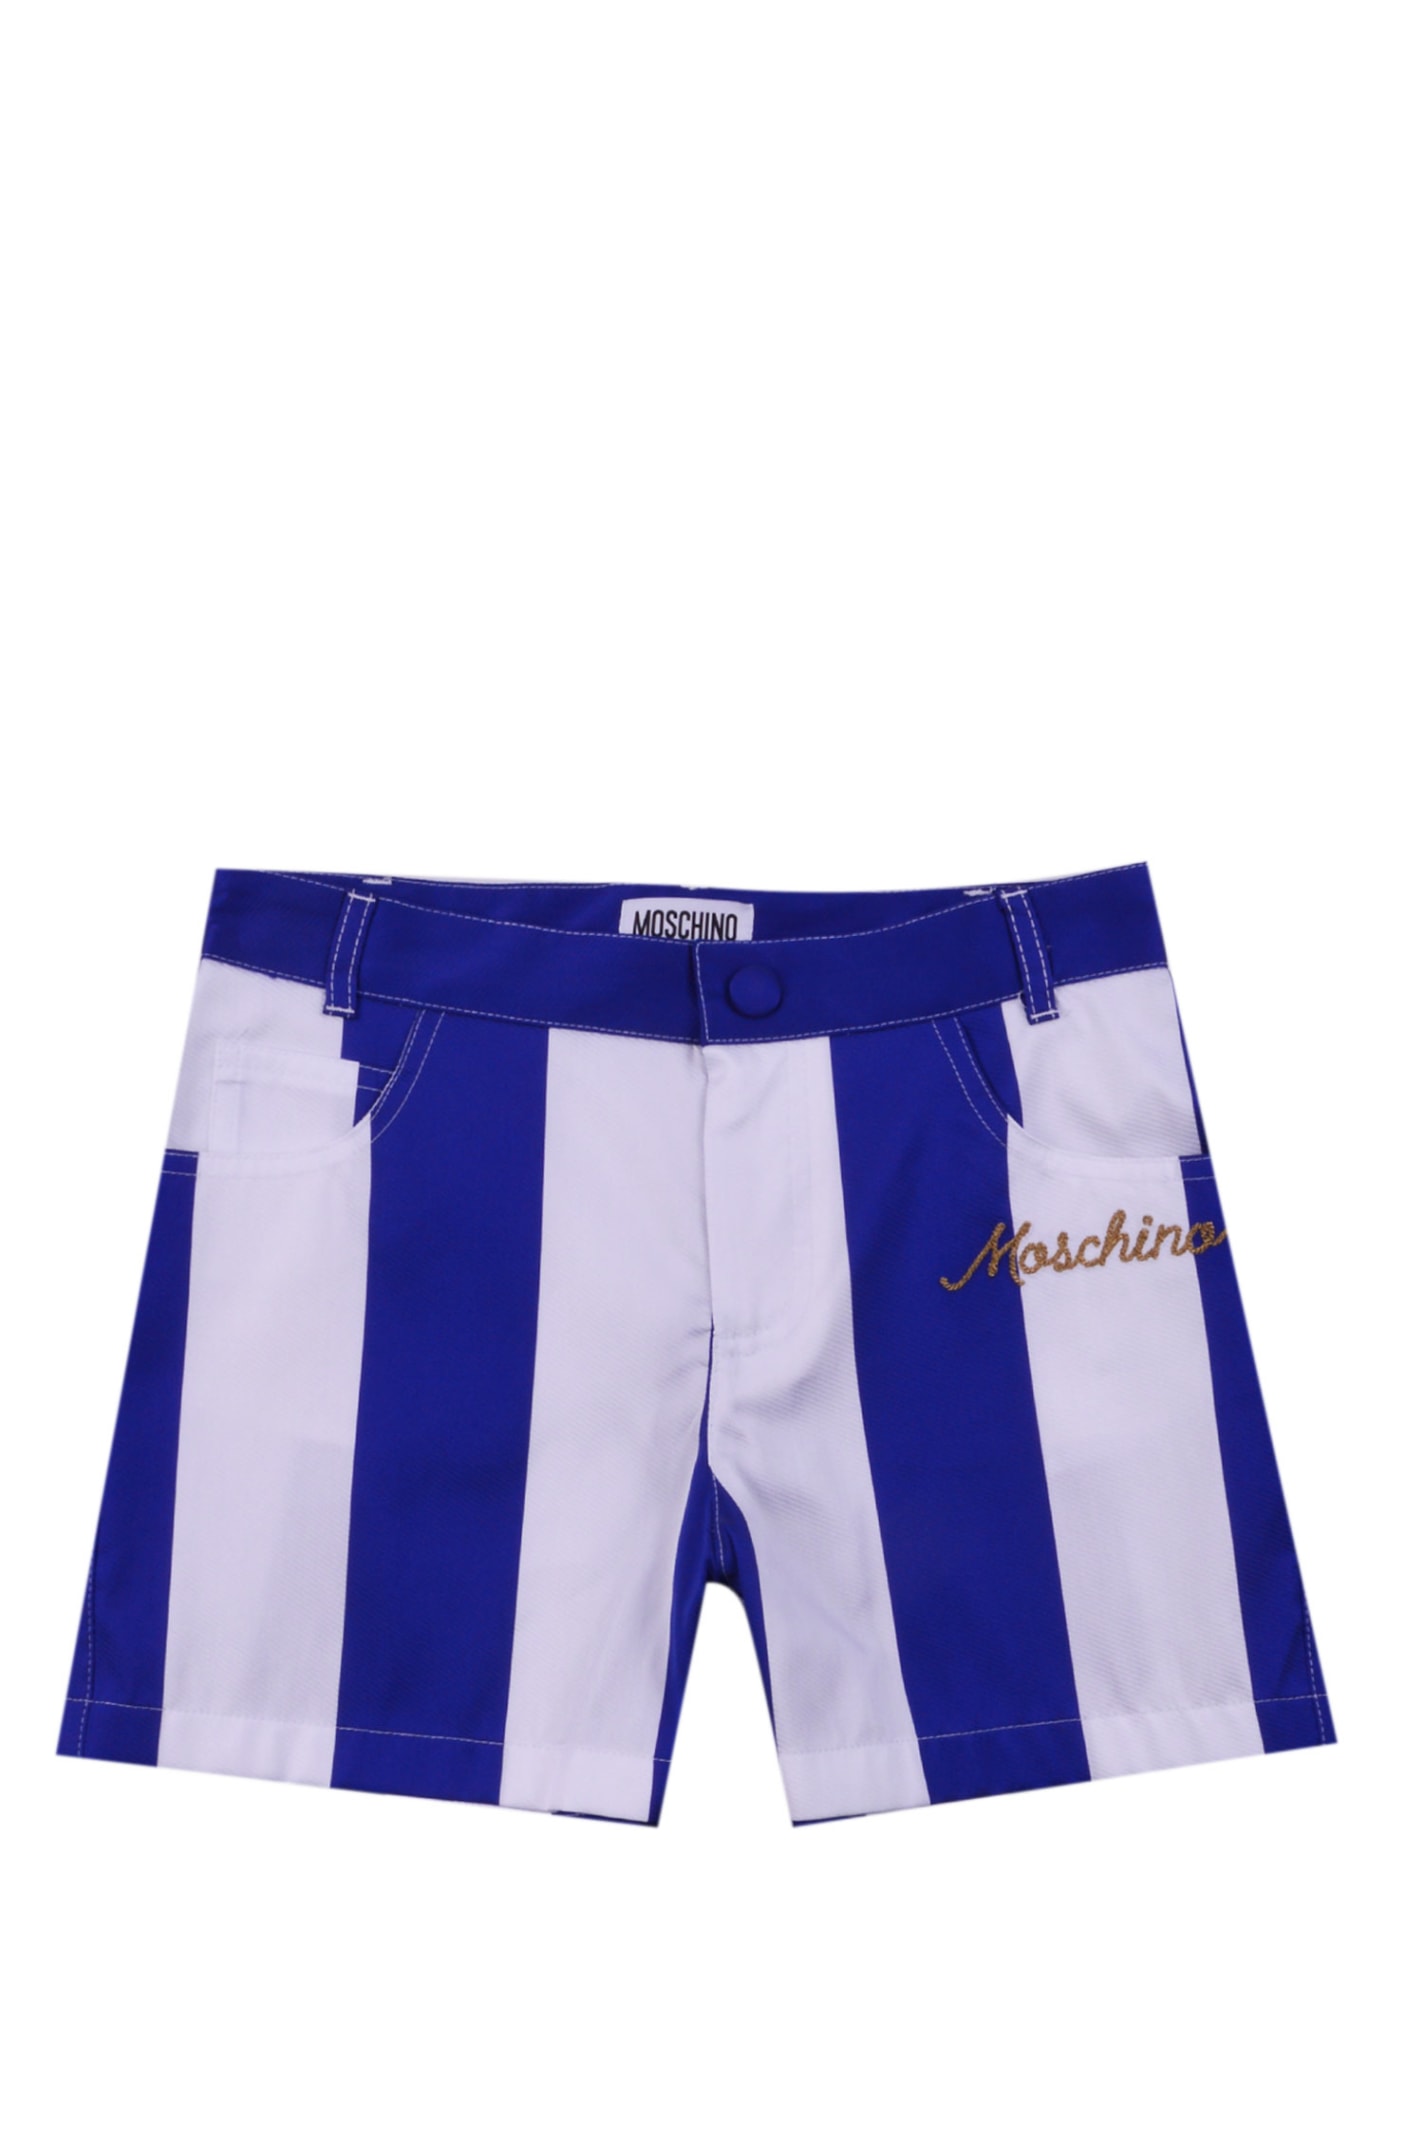 MOSCHINO STRIPED SHORTS WITH EMBROIDERY